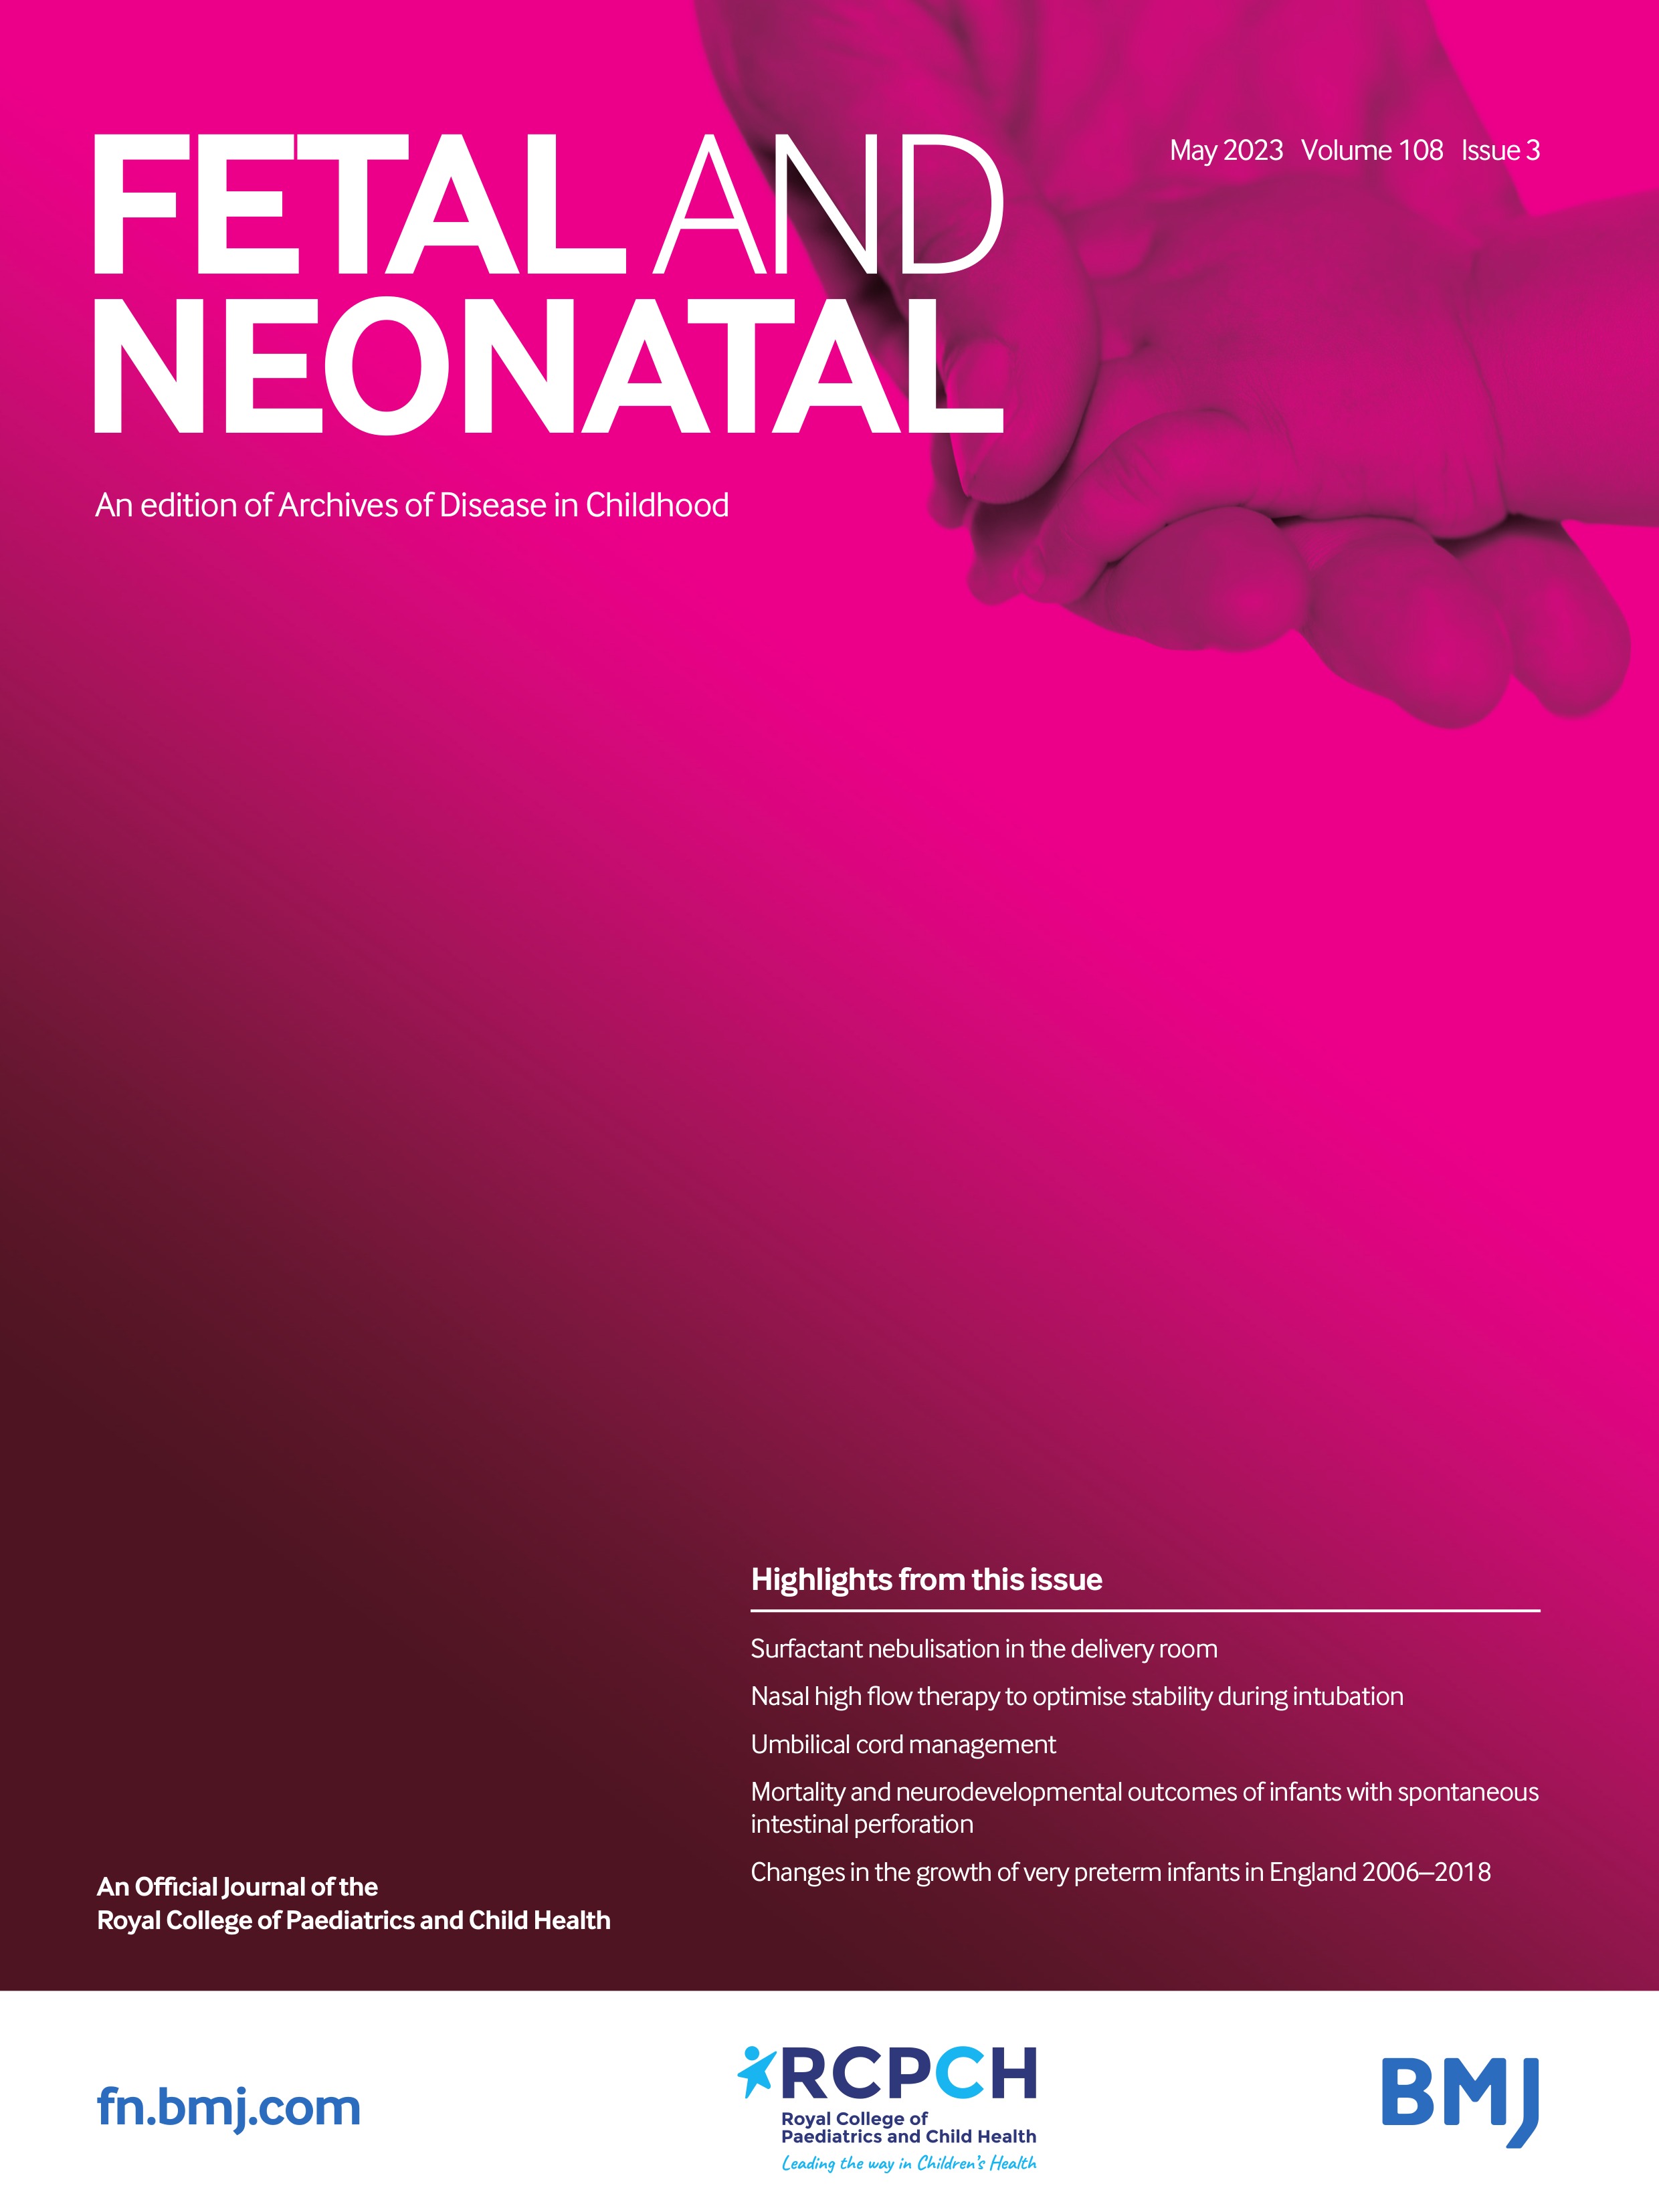 Extreme preterm neonate with fetal warfarin syndrome